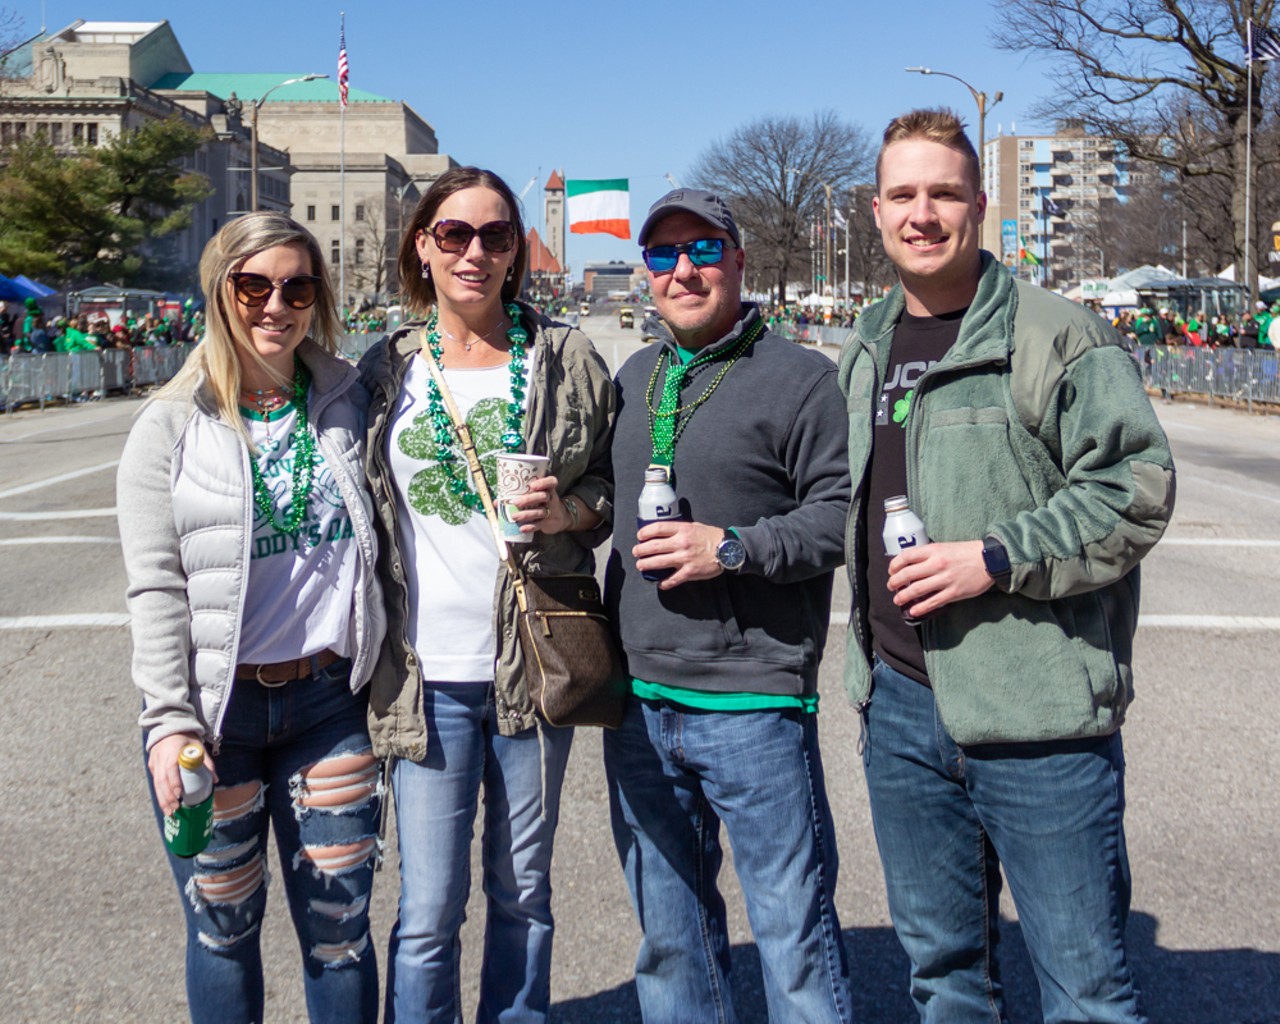 The St. Patrick's Day Parade in Downtown St. Louis Was a Breath O' Fresh Air